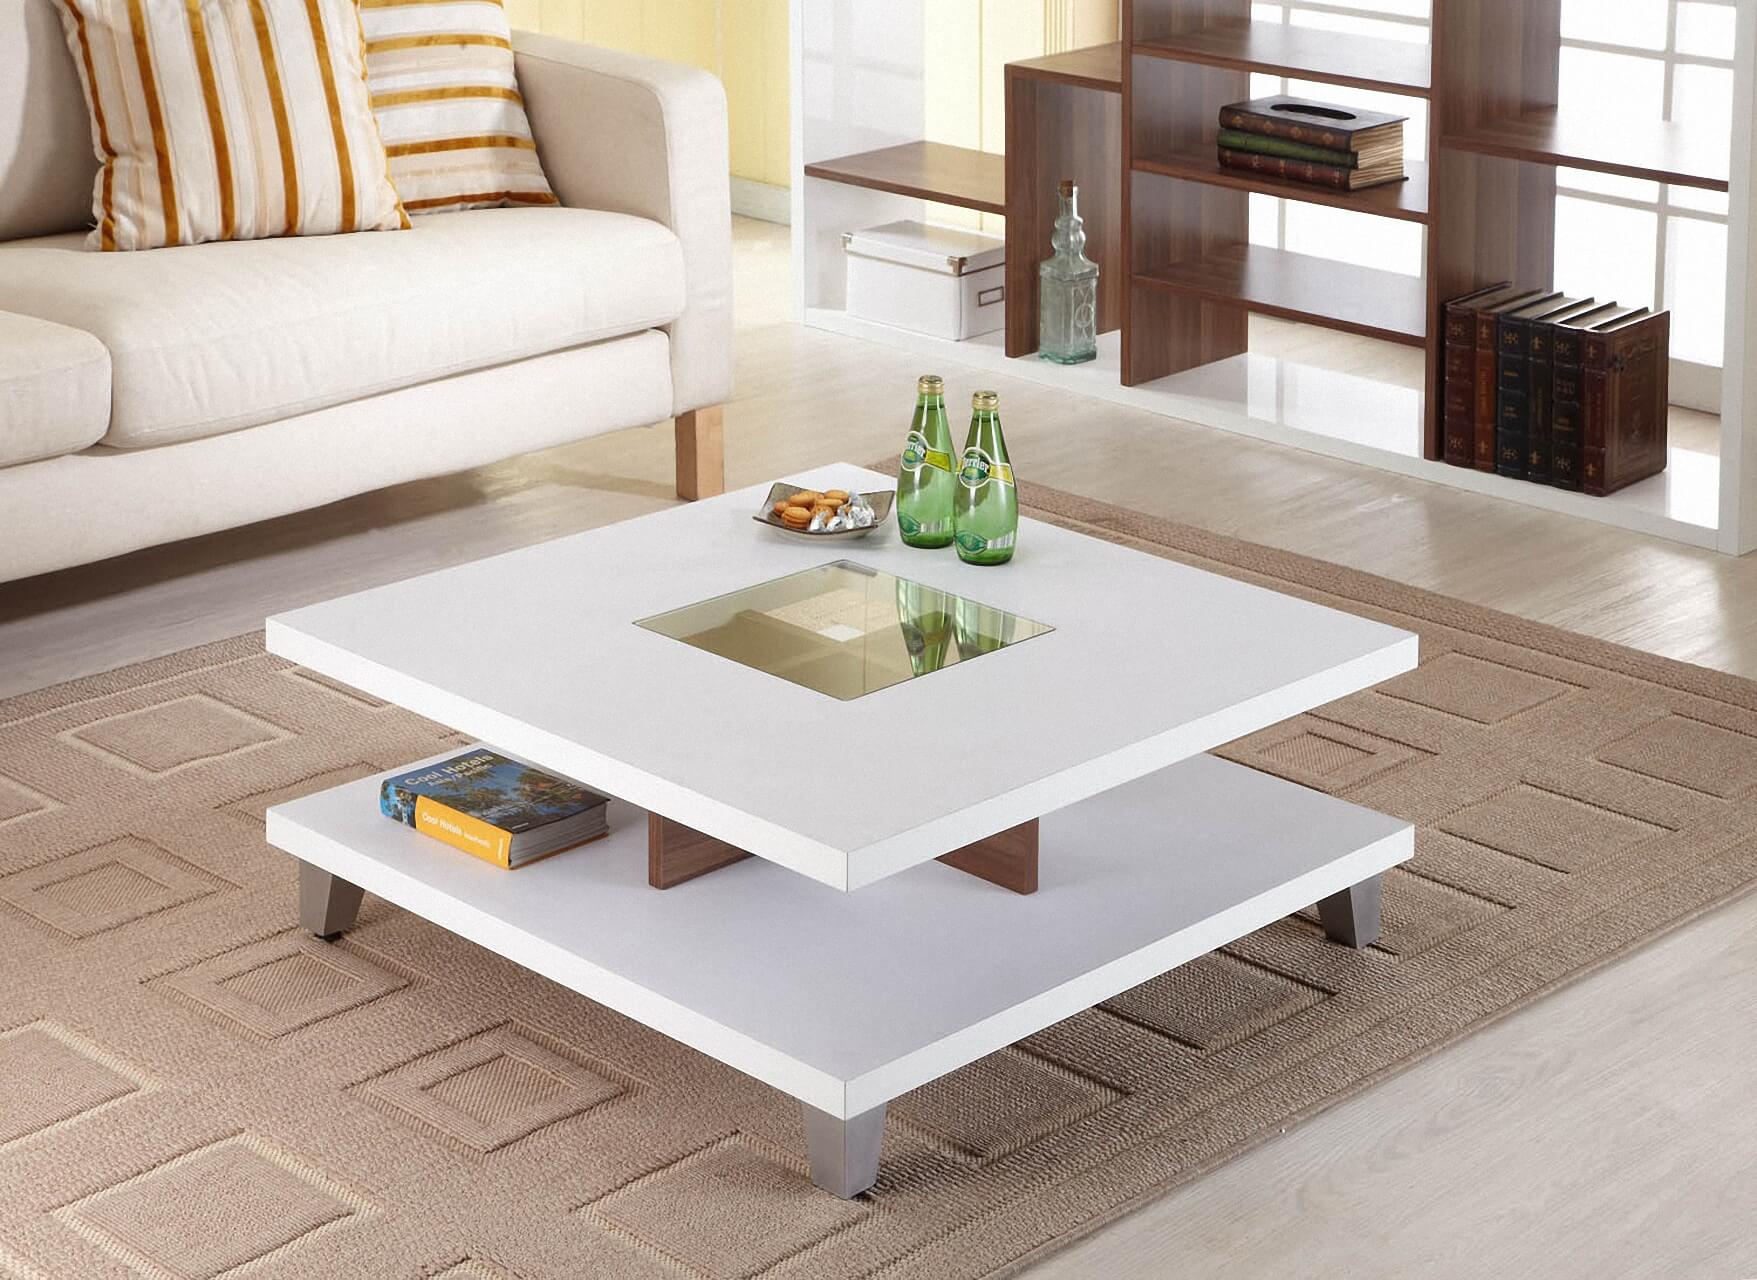 design for center table in kitchen